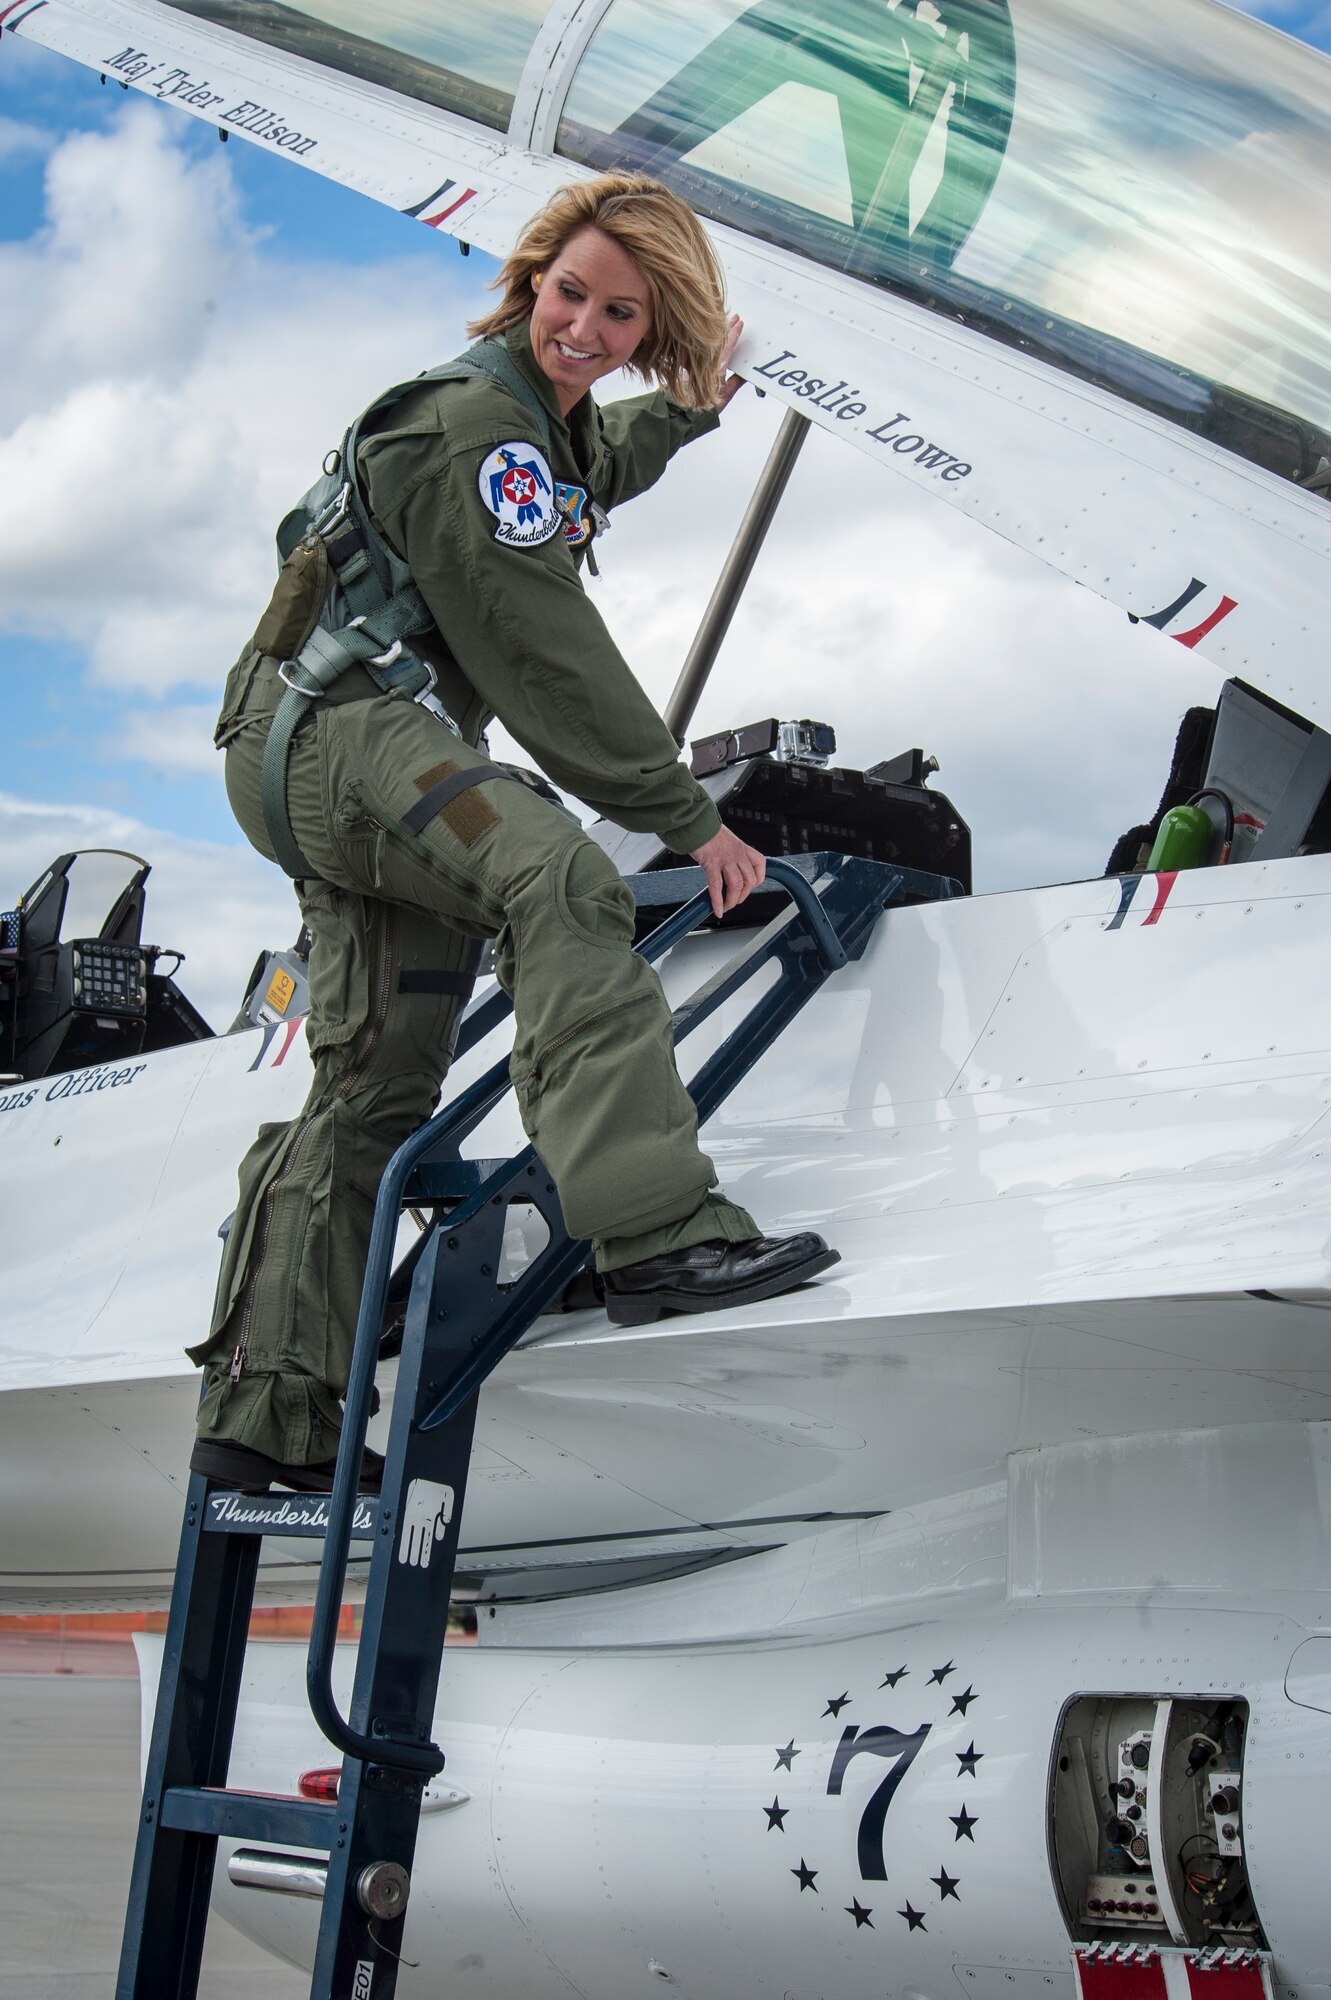 KHQ 6 reporter, Leslie Lowe, climbs out of a U.S. Air Force Thunderbird after returning from her orientation flight as part of SkyFest 2014 at Fairchild Air Force Base, Wash., May 29, 2014. The Thunderbirds have flown the F-16 Fighting Falcon since August 1982, more than half of the team's history. SkyFest is Fairchild’s air show and open house, giving the local and regional community the opportunity to view Airmen and our resources. (U.S. Air Force photo by Staff Sgt. Benjamin W. Stratton/Released)